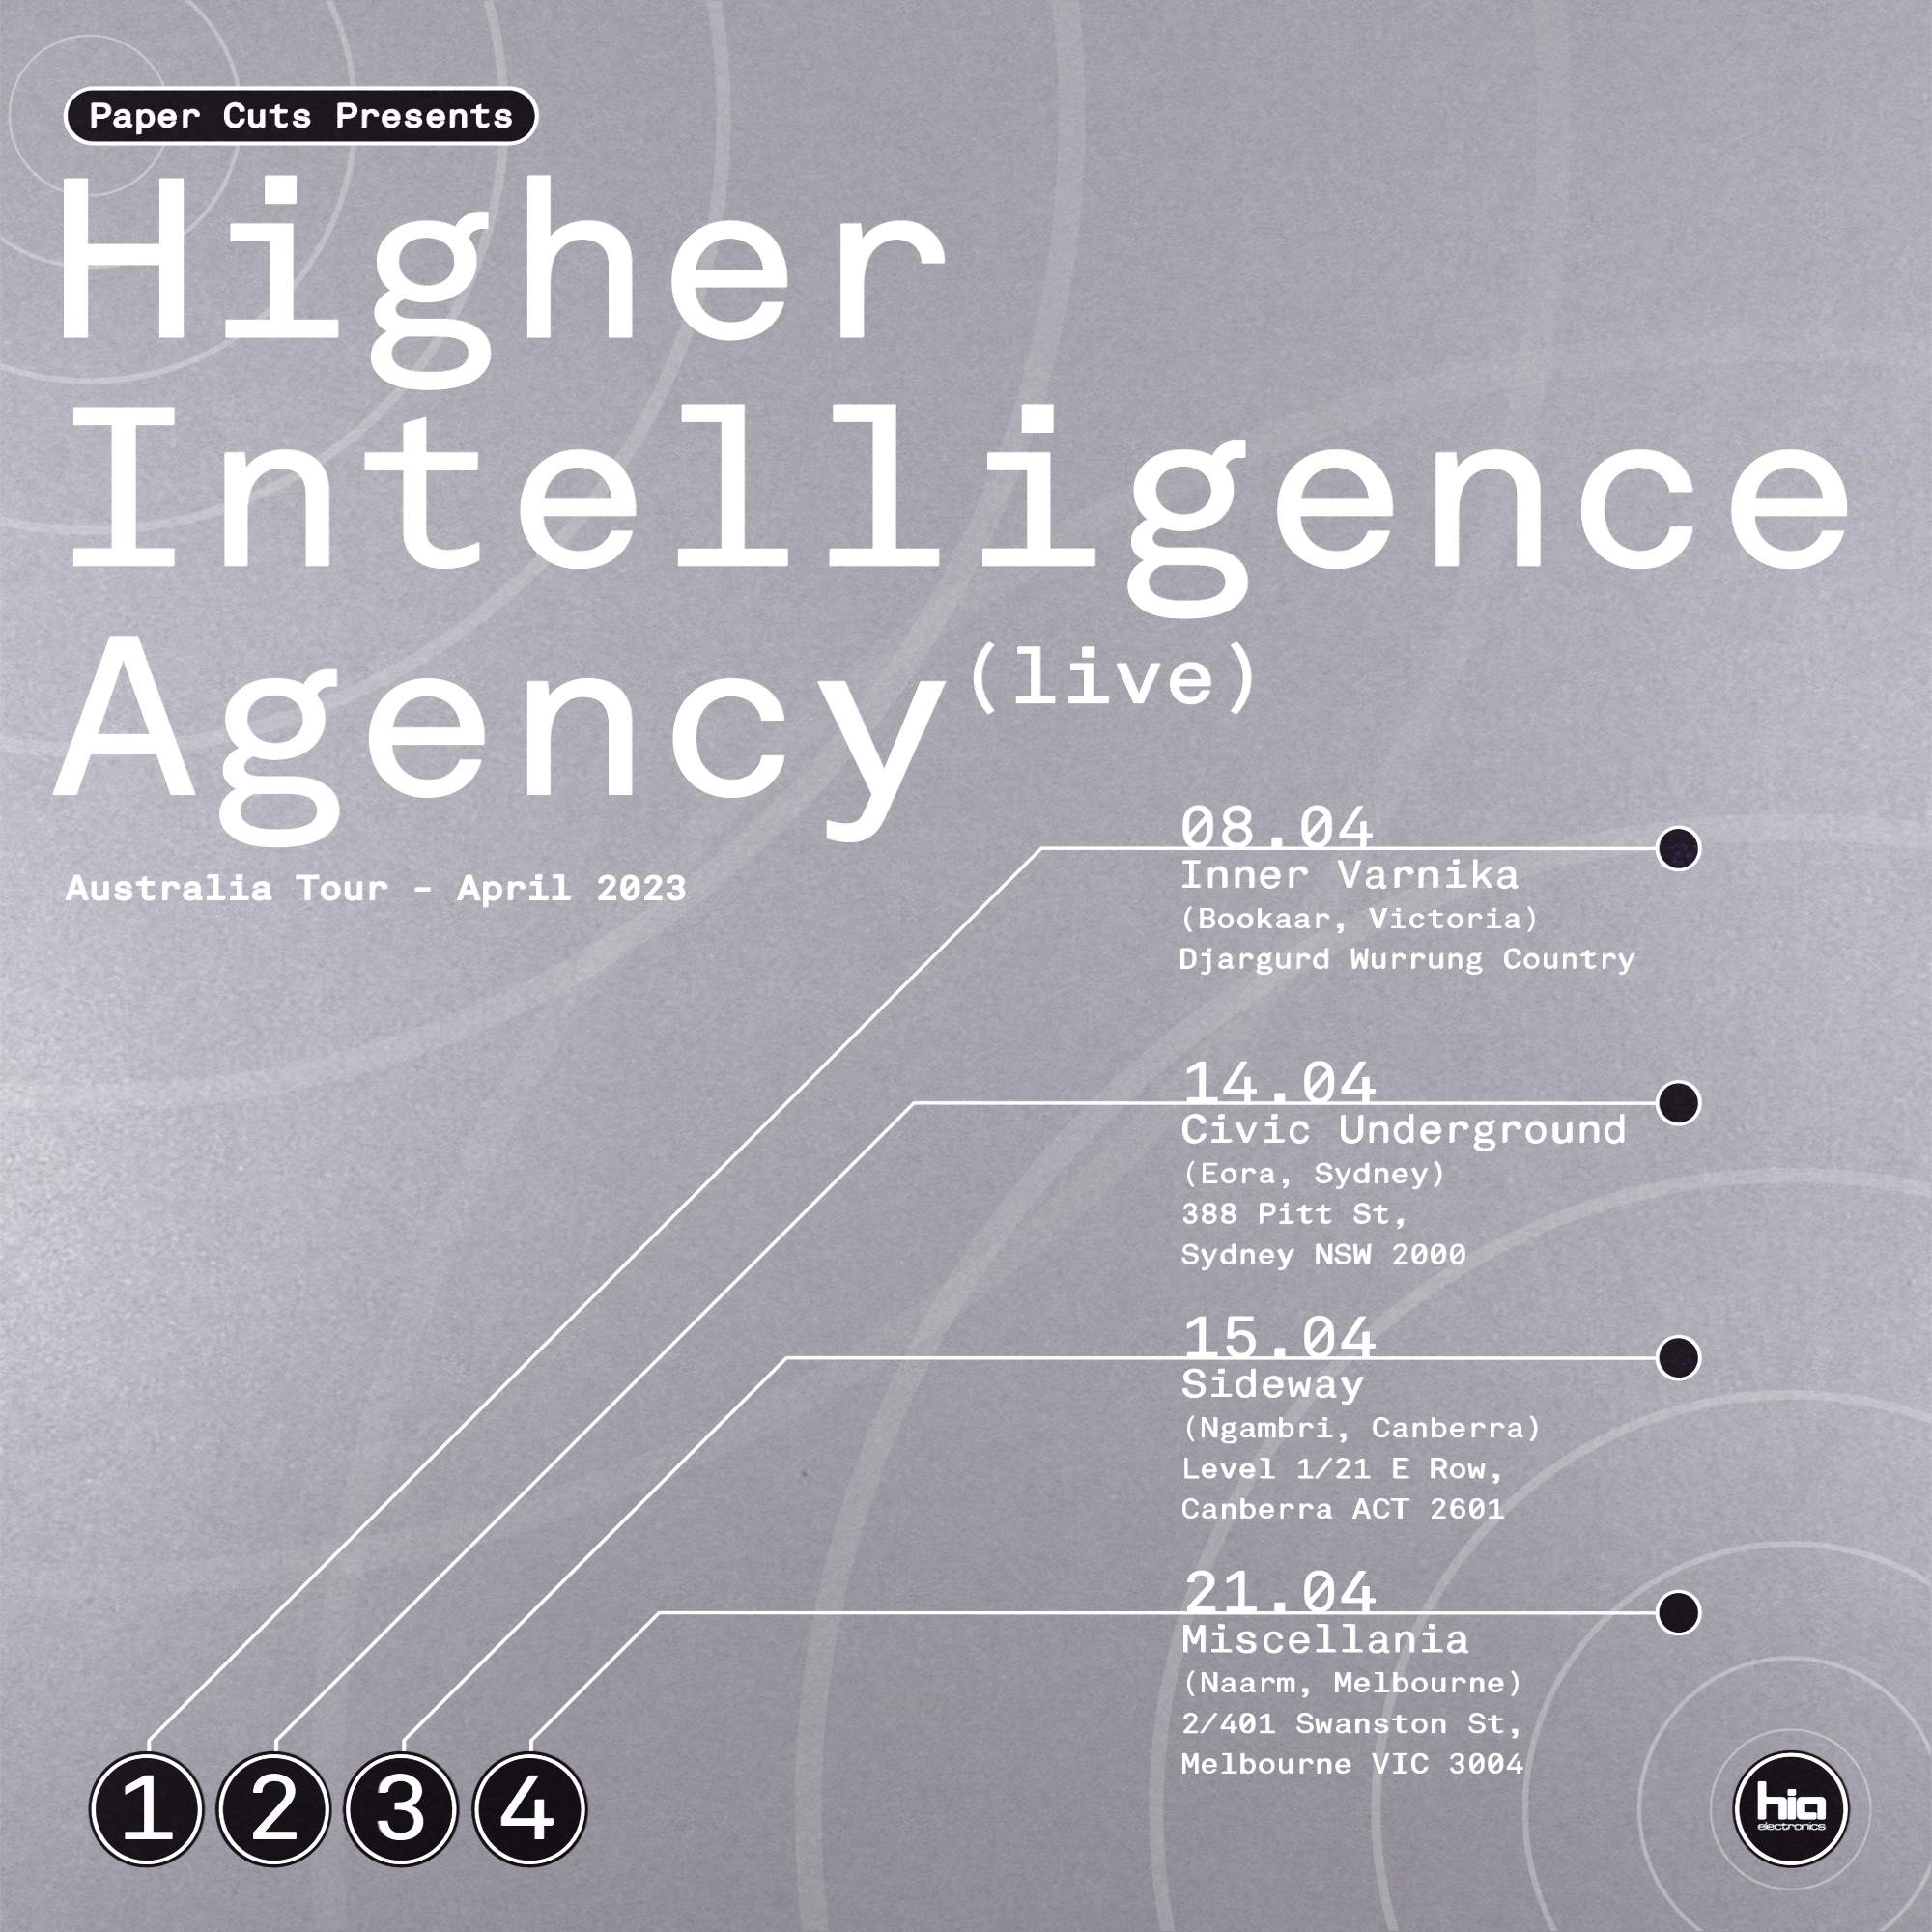 Paper-Cuts presents Higher Intelligence Agency (Live / Civic Underground) - フライヤー裏